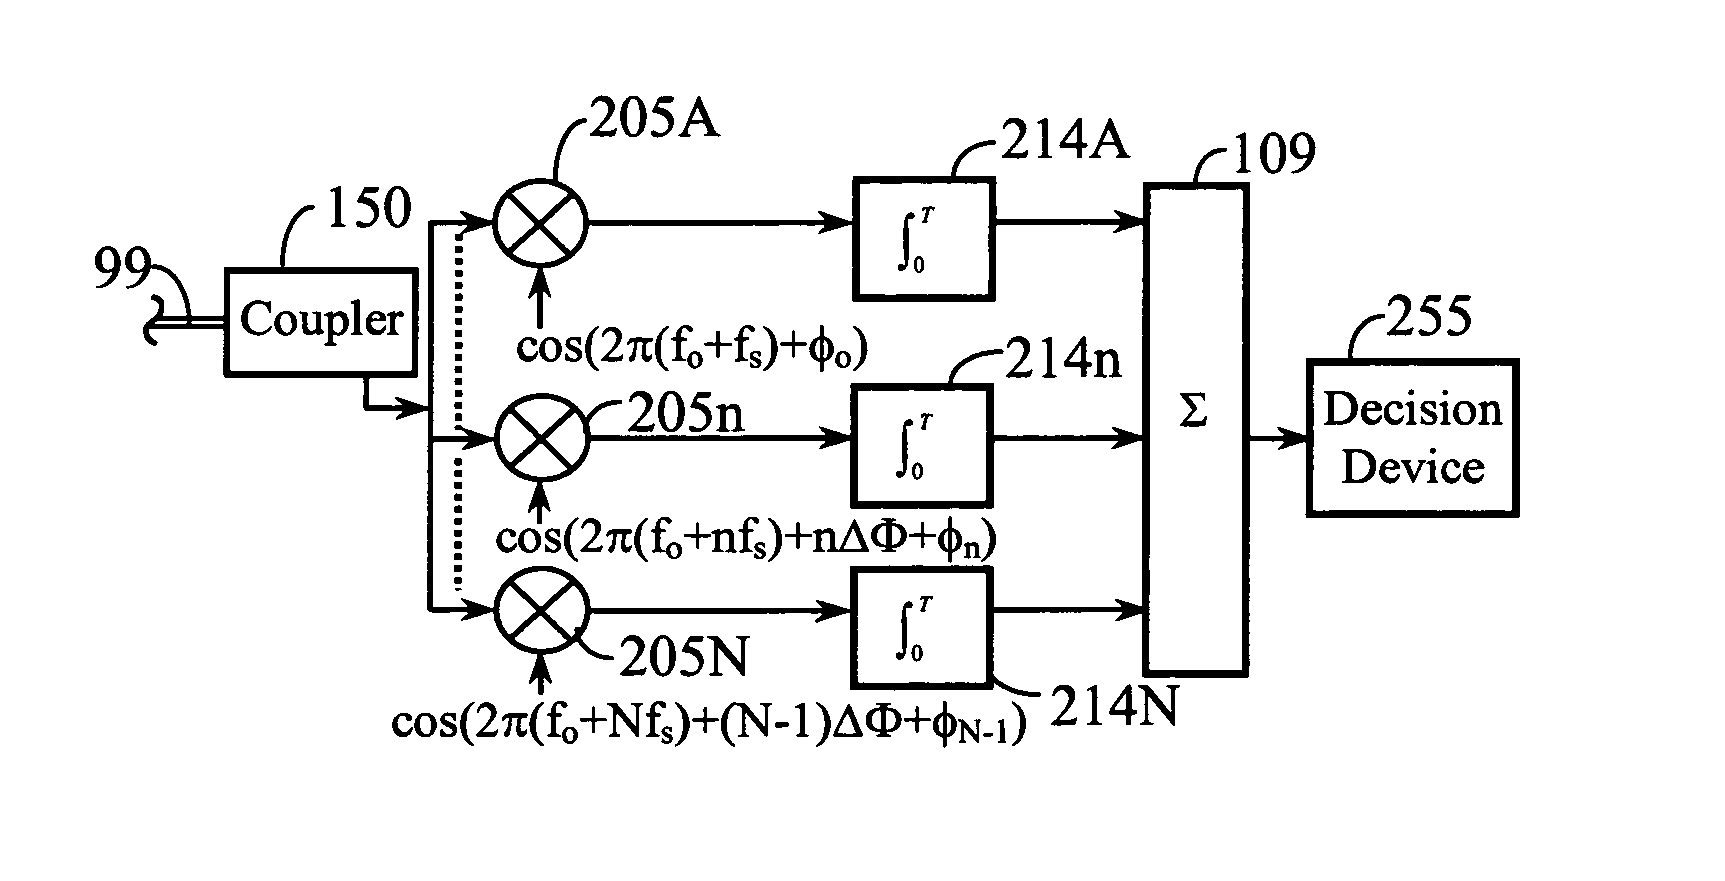 Method and apparatus for using multicarrier interferometry to enhance optical fiber communications